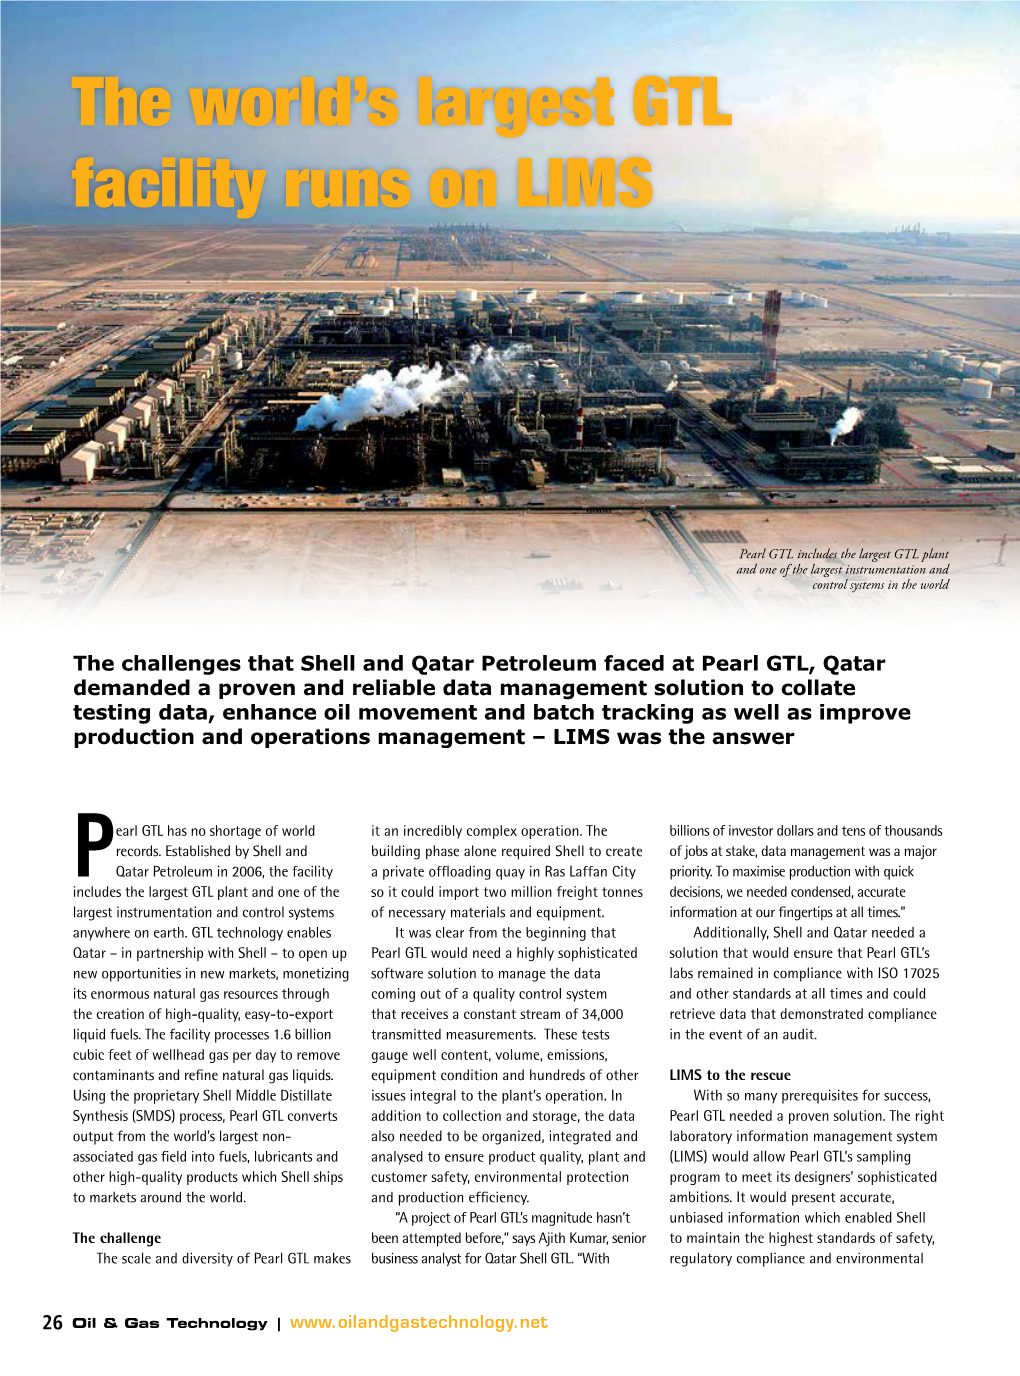 The World's Largest GTL Facility Runs on LIMS